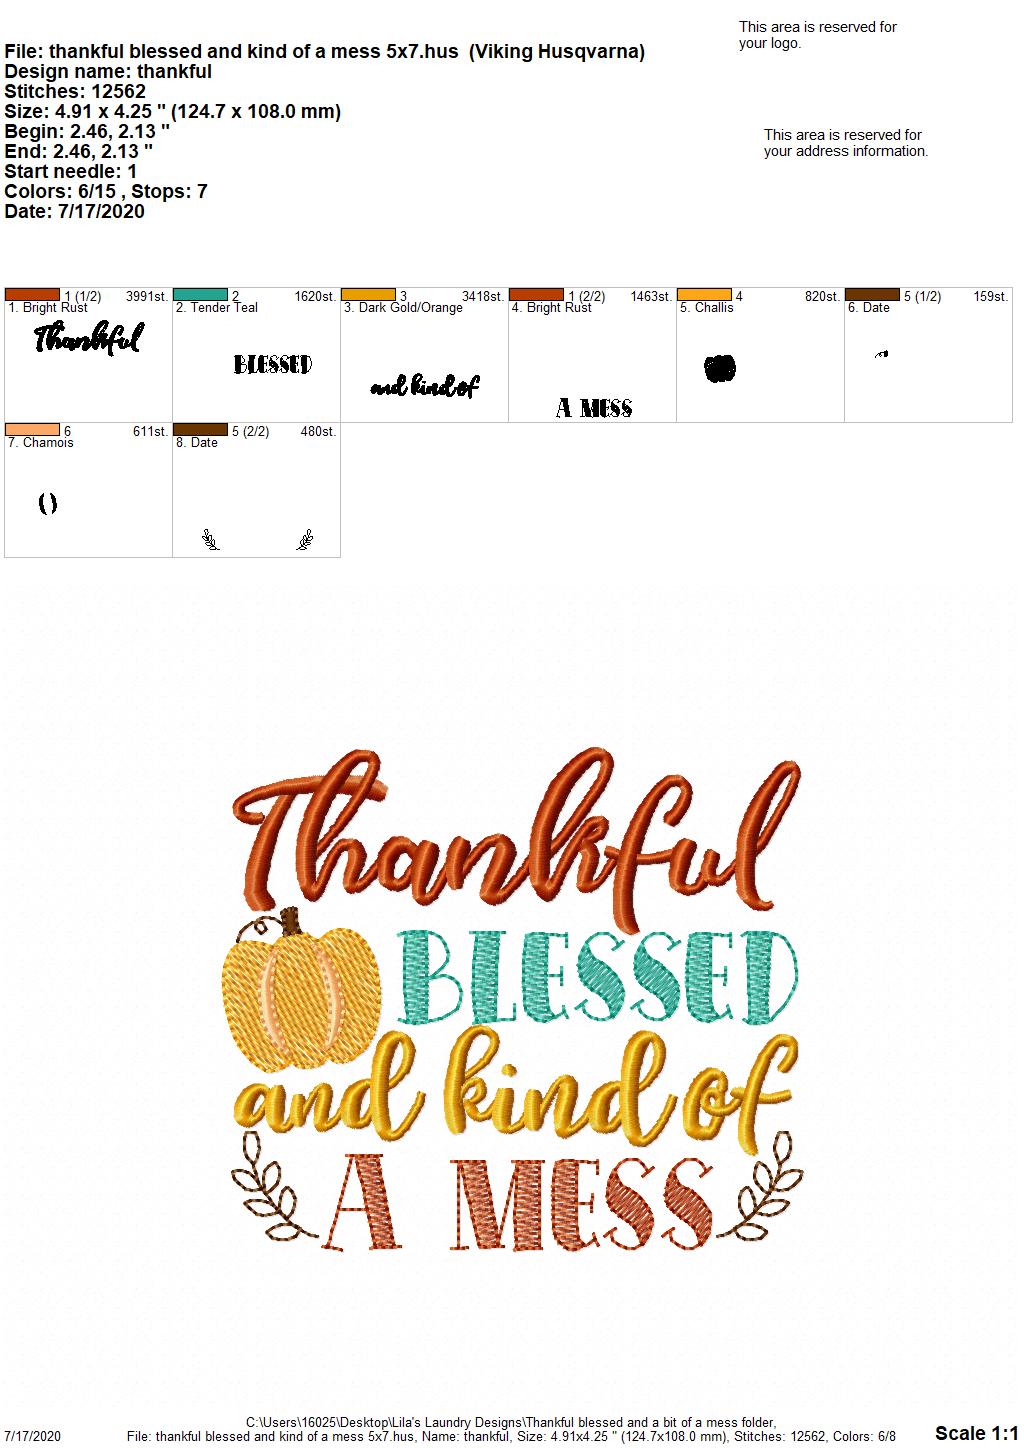 Thankful Blessed and Kind of a Mess - 3 Sizes - Digital Embroidery Design